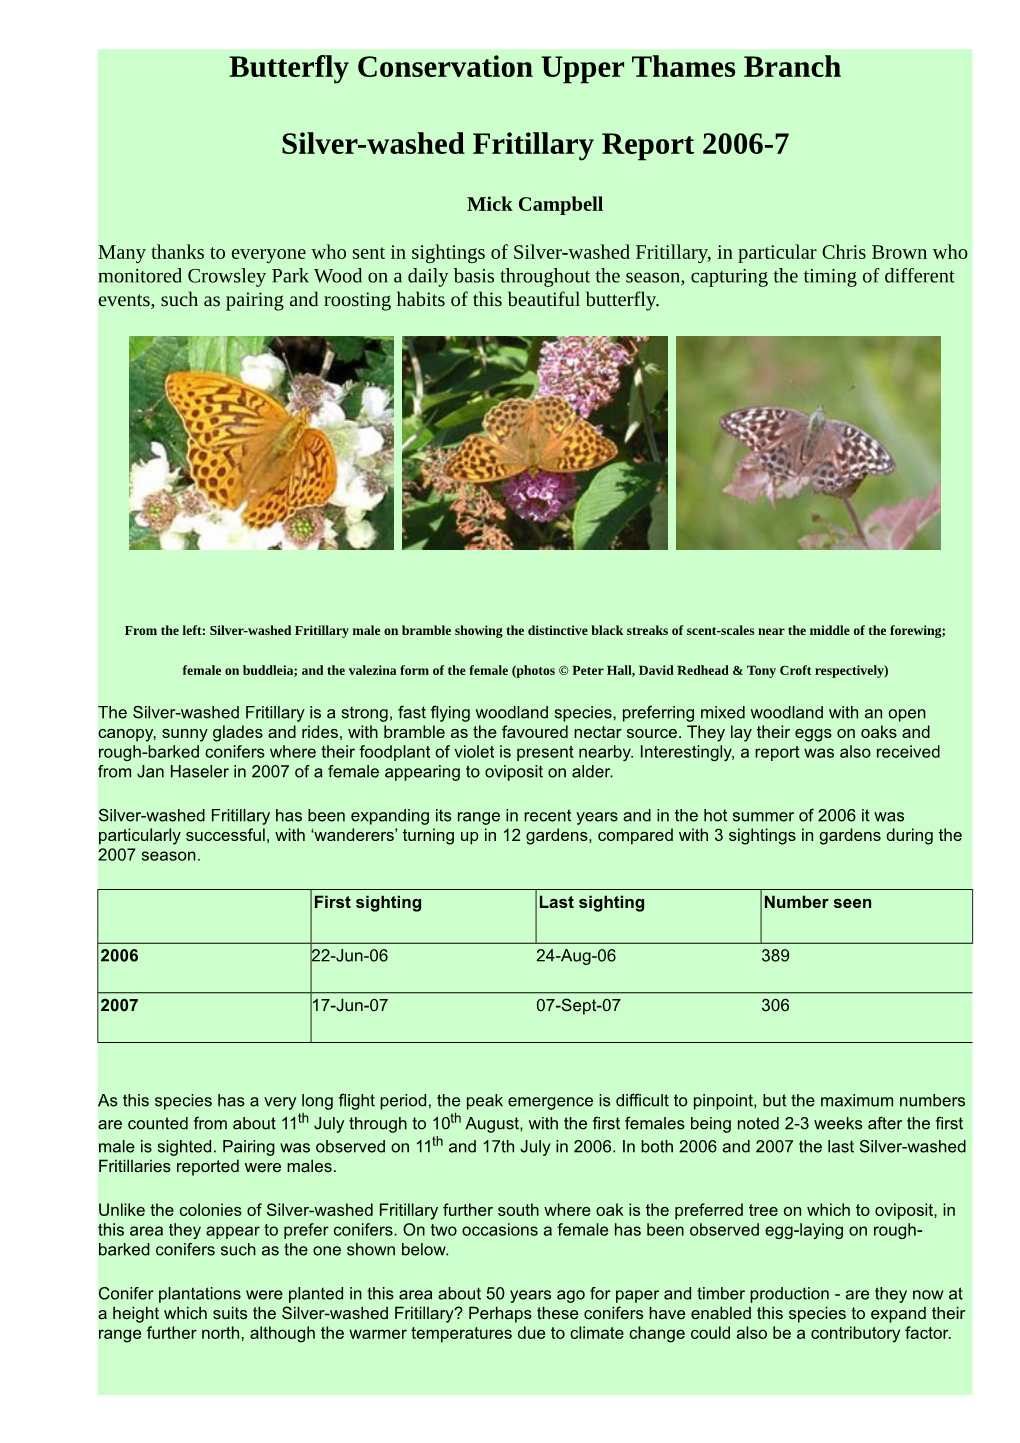 Butterfly Conservation Upper Thames Branch Silver-Washed Fritillary